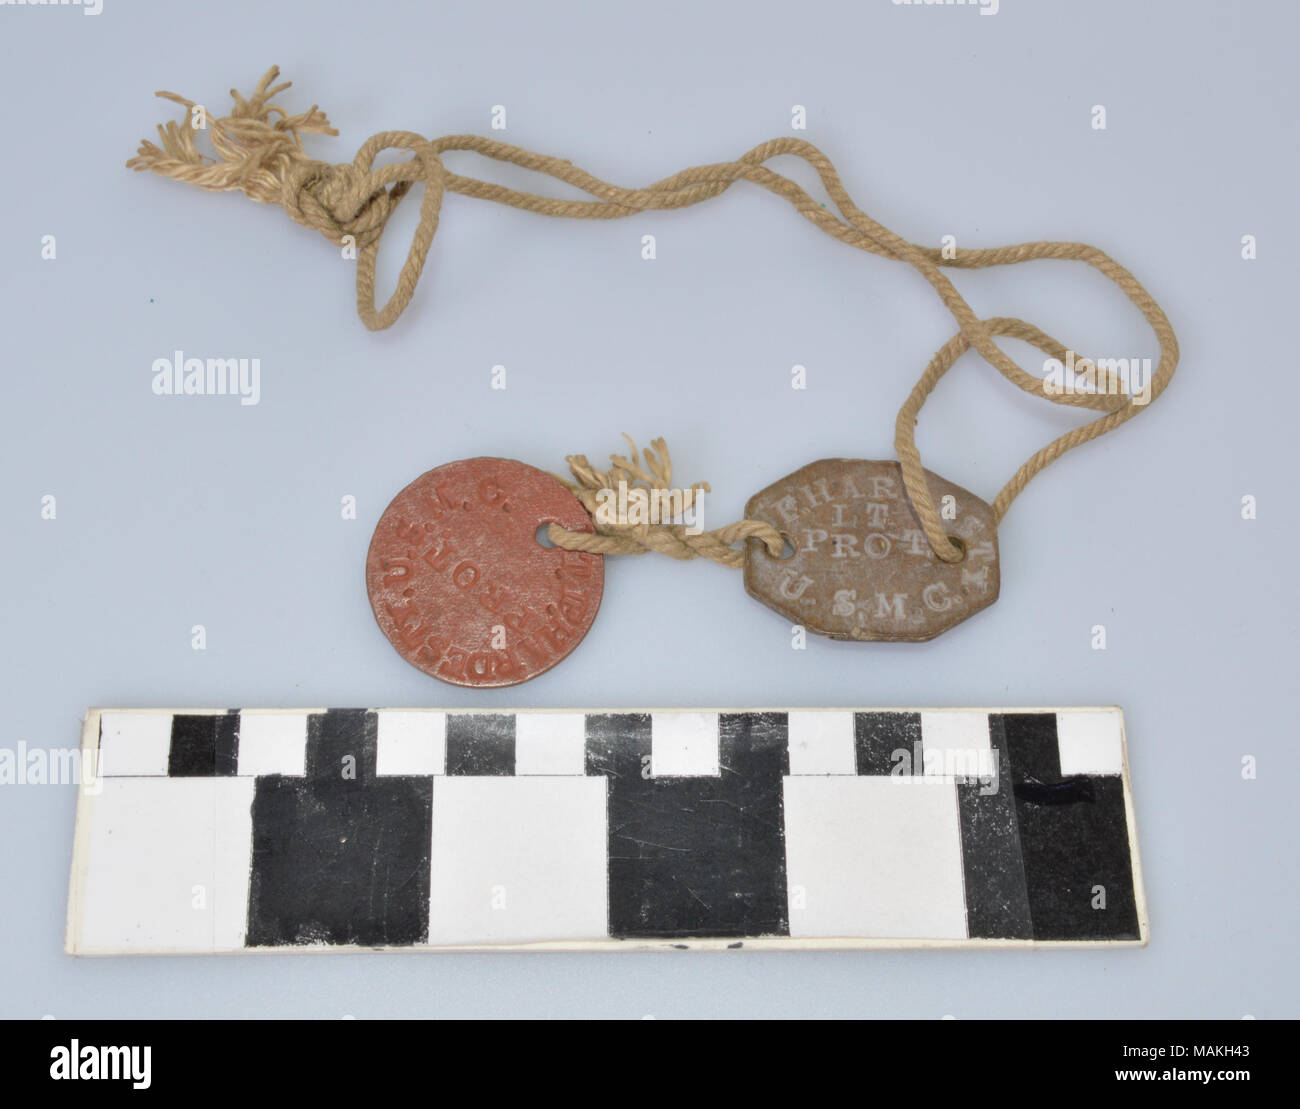 Set of dog tags issued to John Frank Hardesty by the British Military during his service in the U.S. Medical Corps and Seaforth HIghlanders in World War I. The tags are made of a vulcanized asbestos fiber and are on a thick string. They feature Hardesty's religion (PROT or Protestant) and rank of Lieutenant, which mean they were issued early in his service. Title: World War I British Dog Tags of John F. Hardesty  . after 1917. Stock Photo